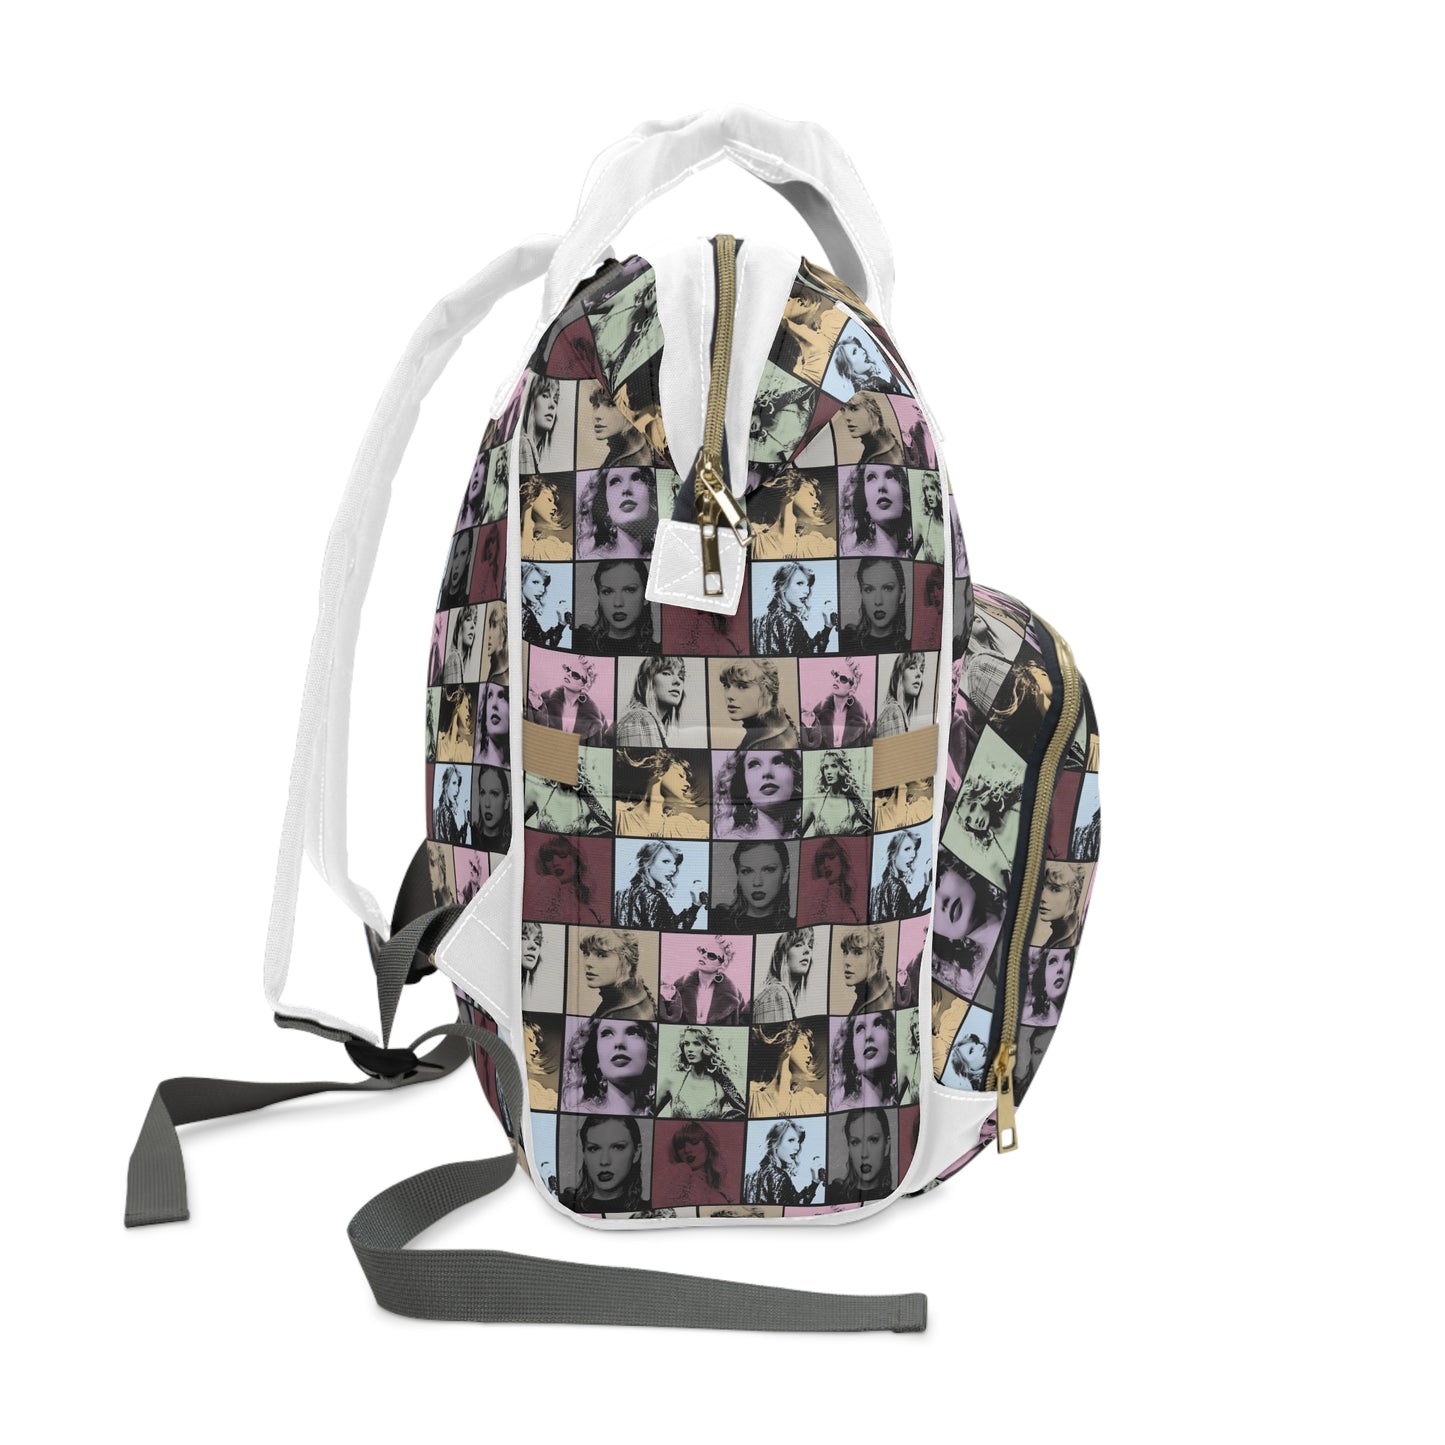 Taylor Swift Eras Collage Multifunctional Diaper Backpack